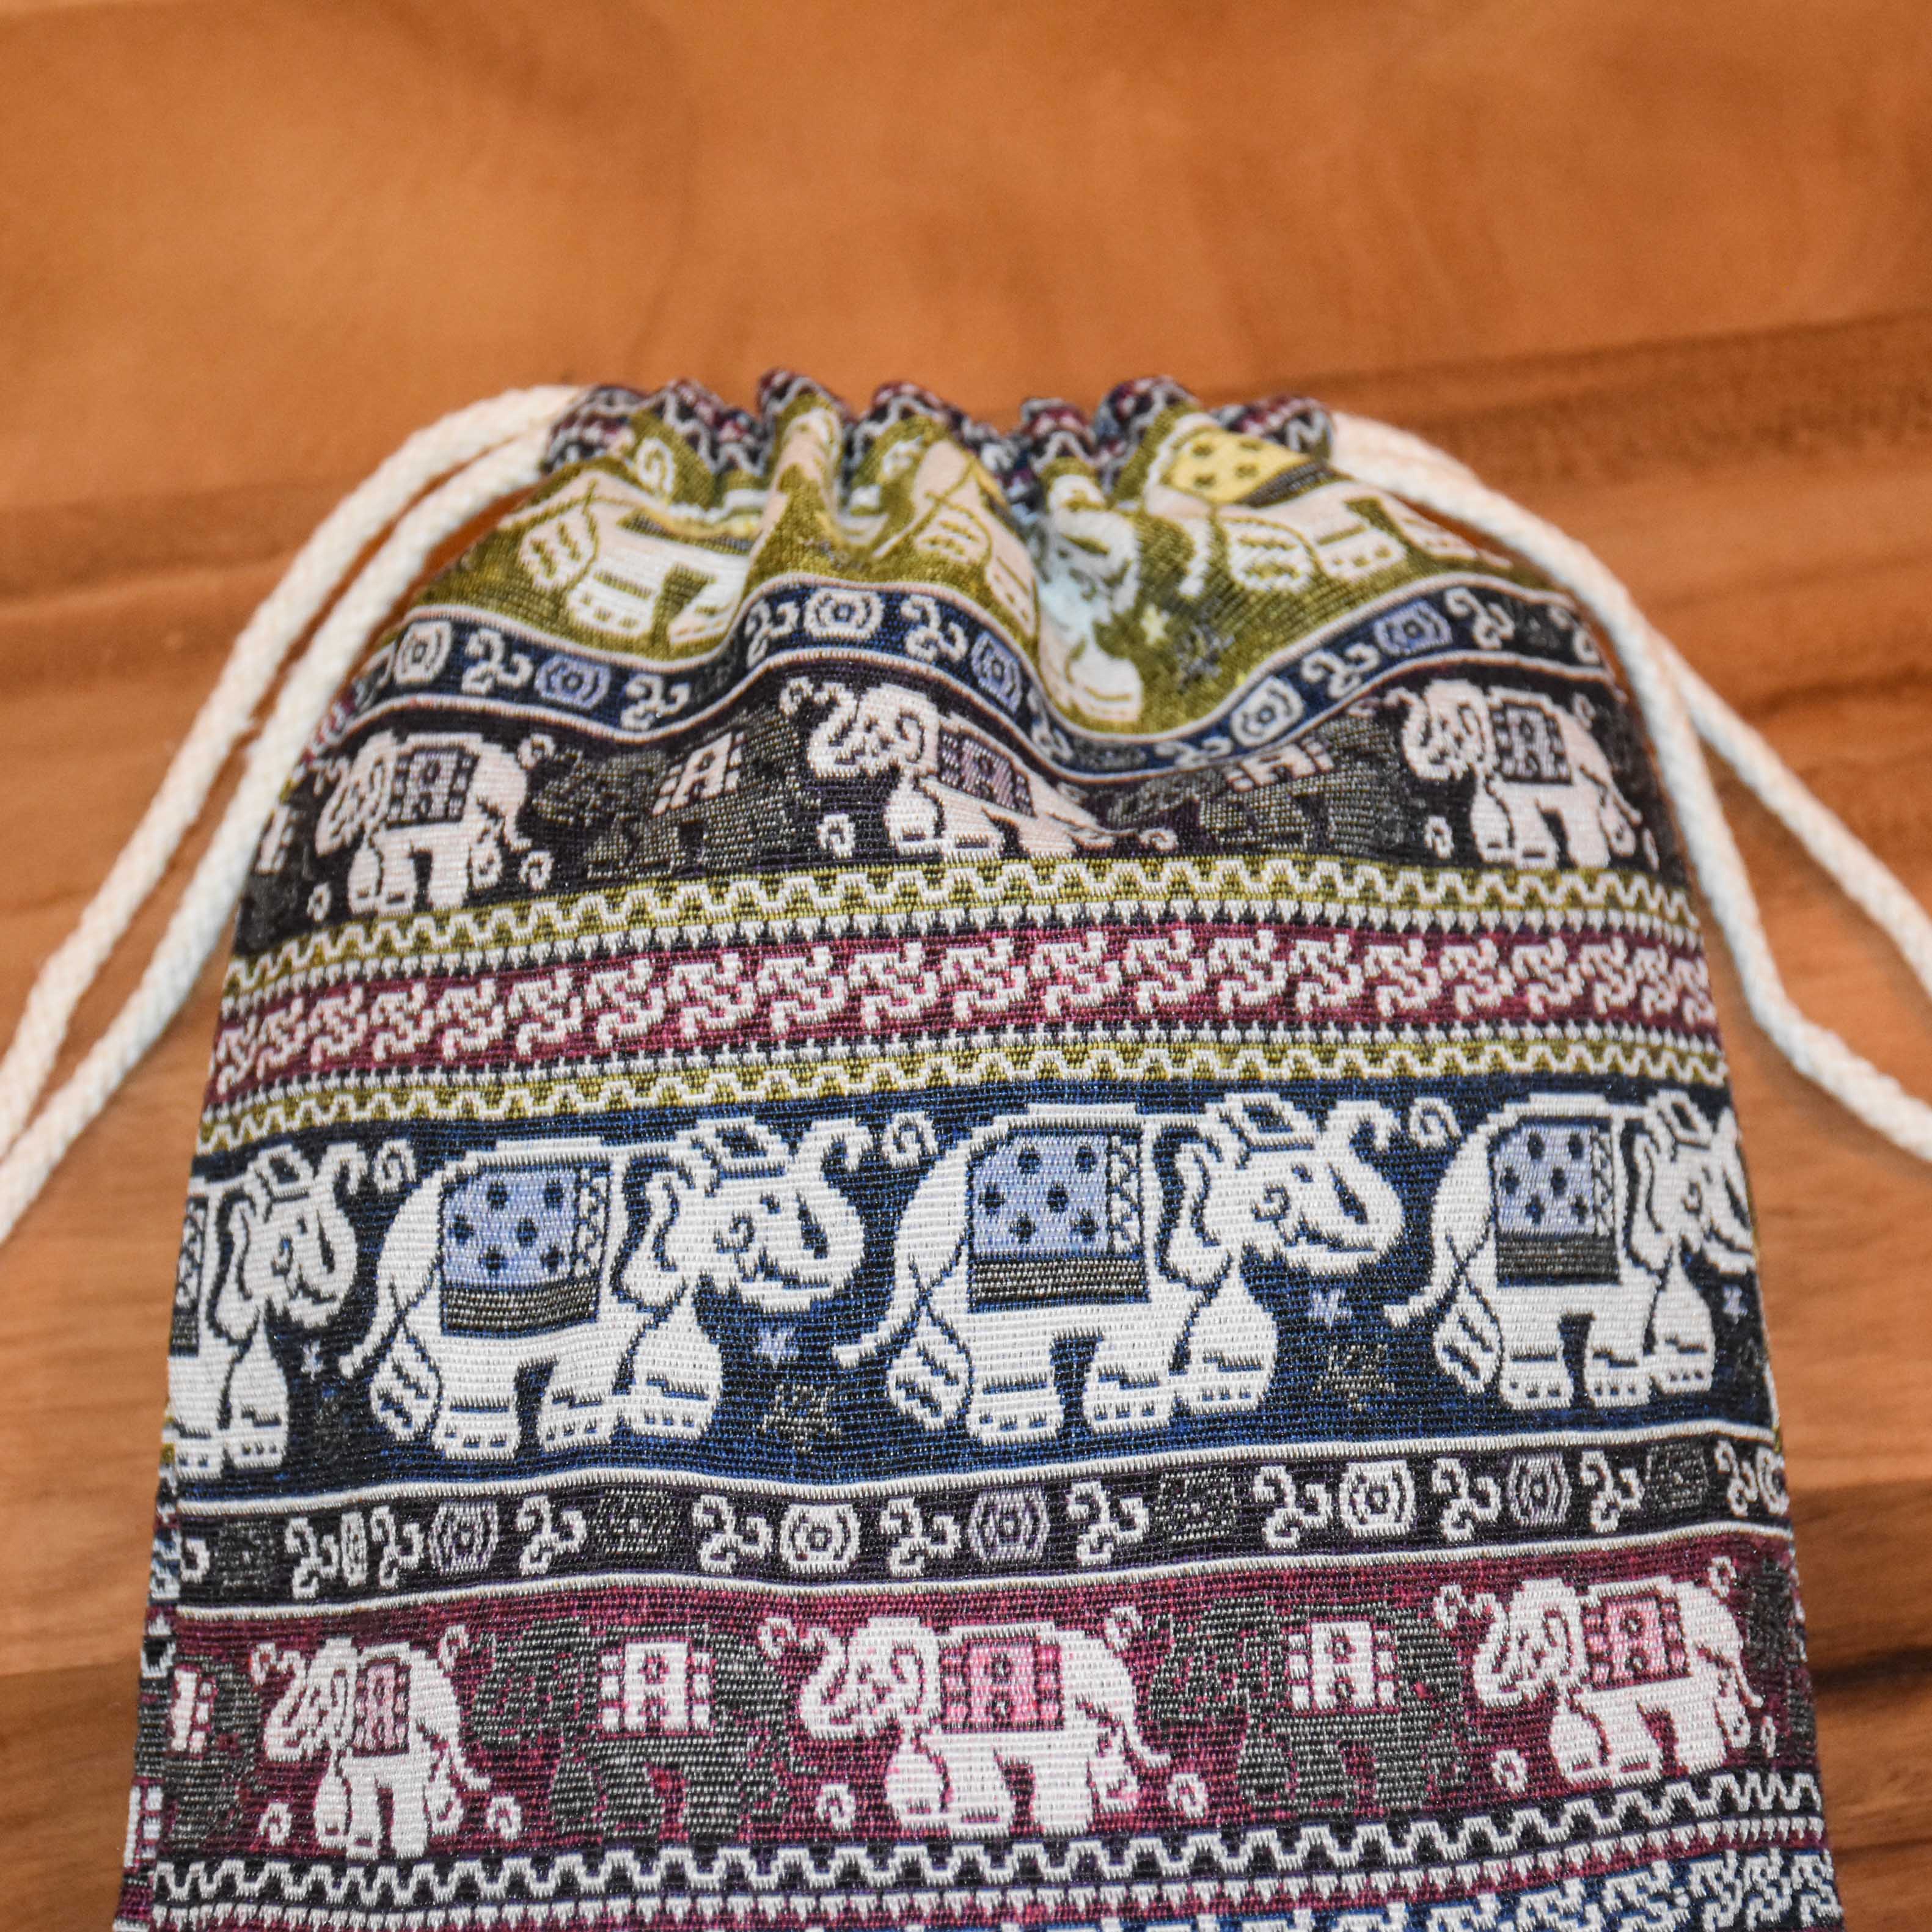 BENGALI TRAVEL BAG Elepanta Travel Bags - Buy Today Elephant Pants Jewelry And Bohemian Clothes Handmade In Thailand Help To Save The Elephants FairTrade And Vegan